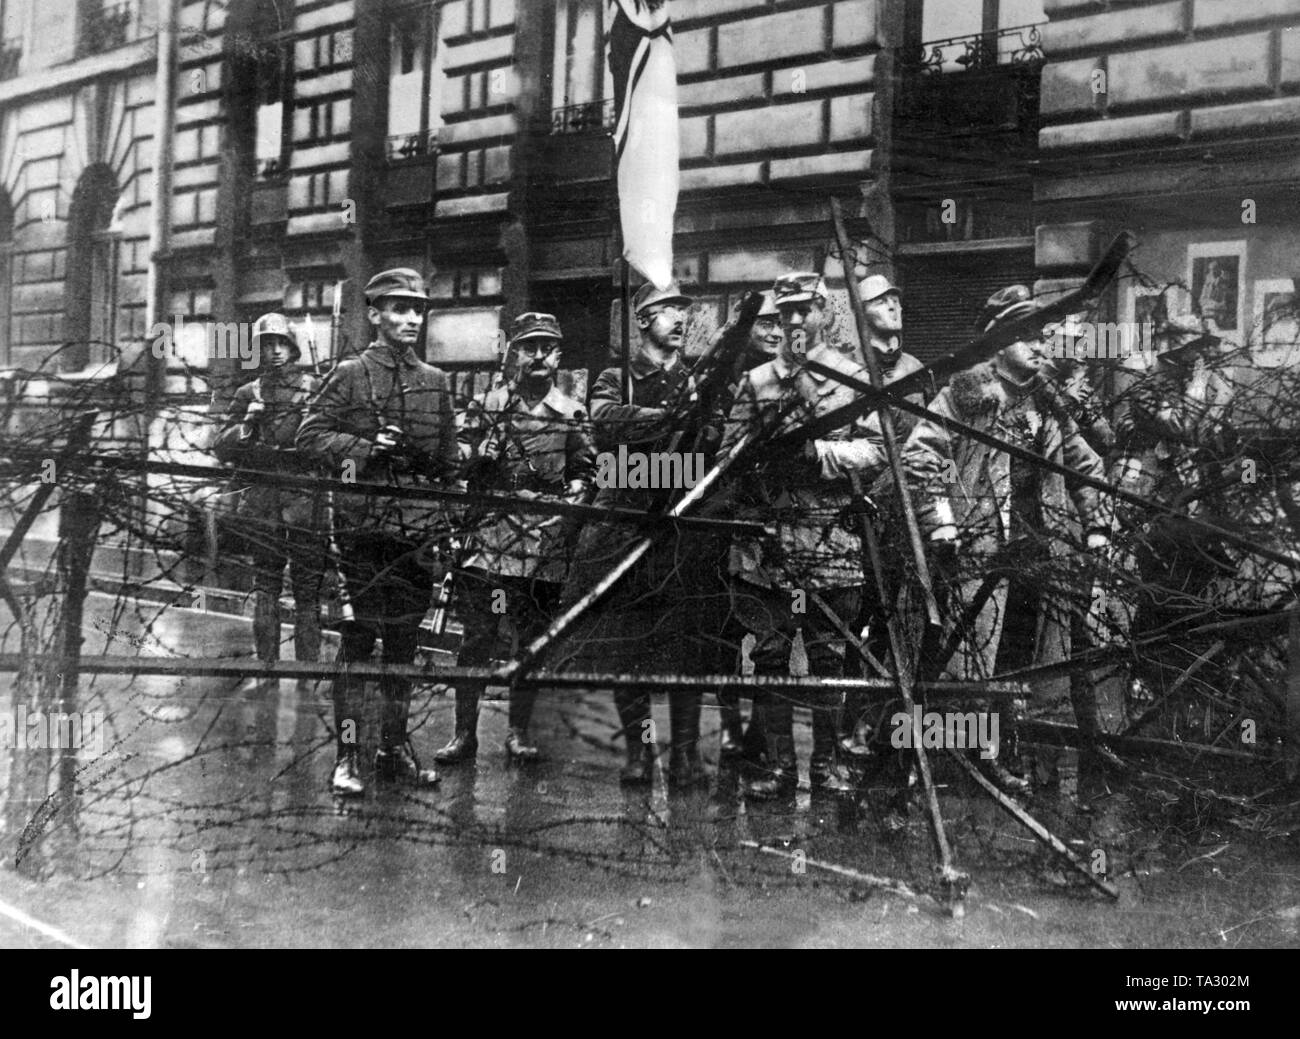 Heinrich Himmler (third from left) with the Wachtruppe 'Reichskriegsflagge' behind a road block during the Beer Hall Putsch in Munich 1923. Stock Photo